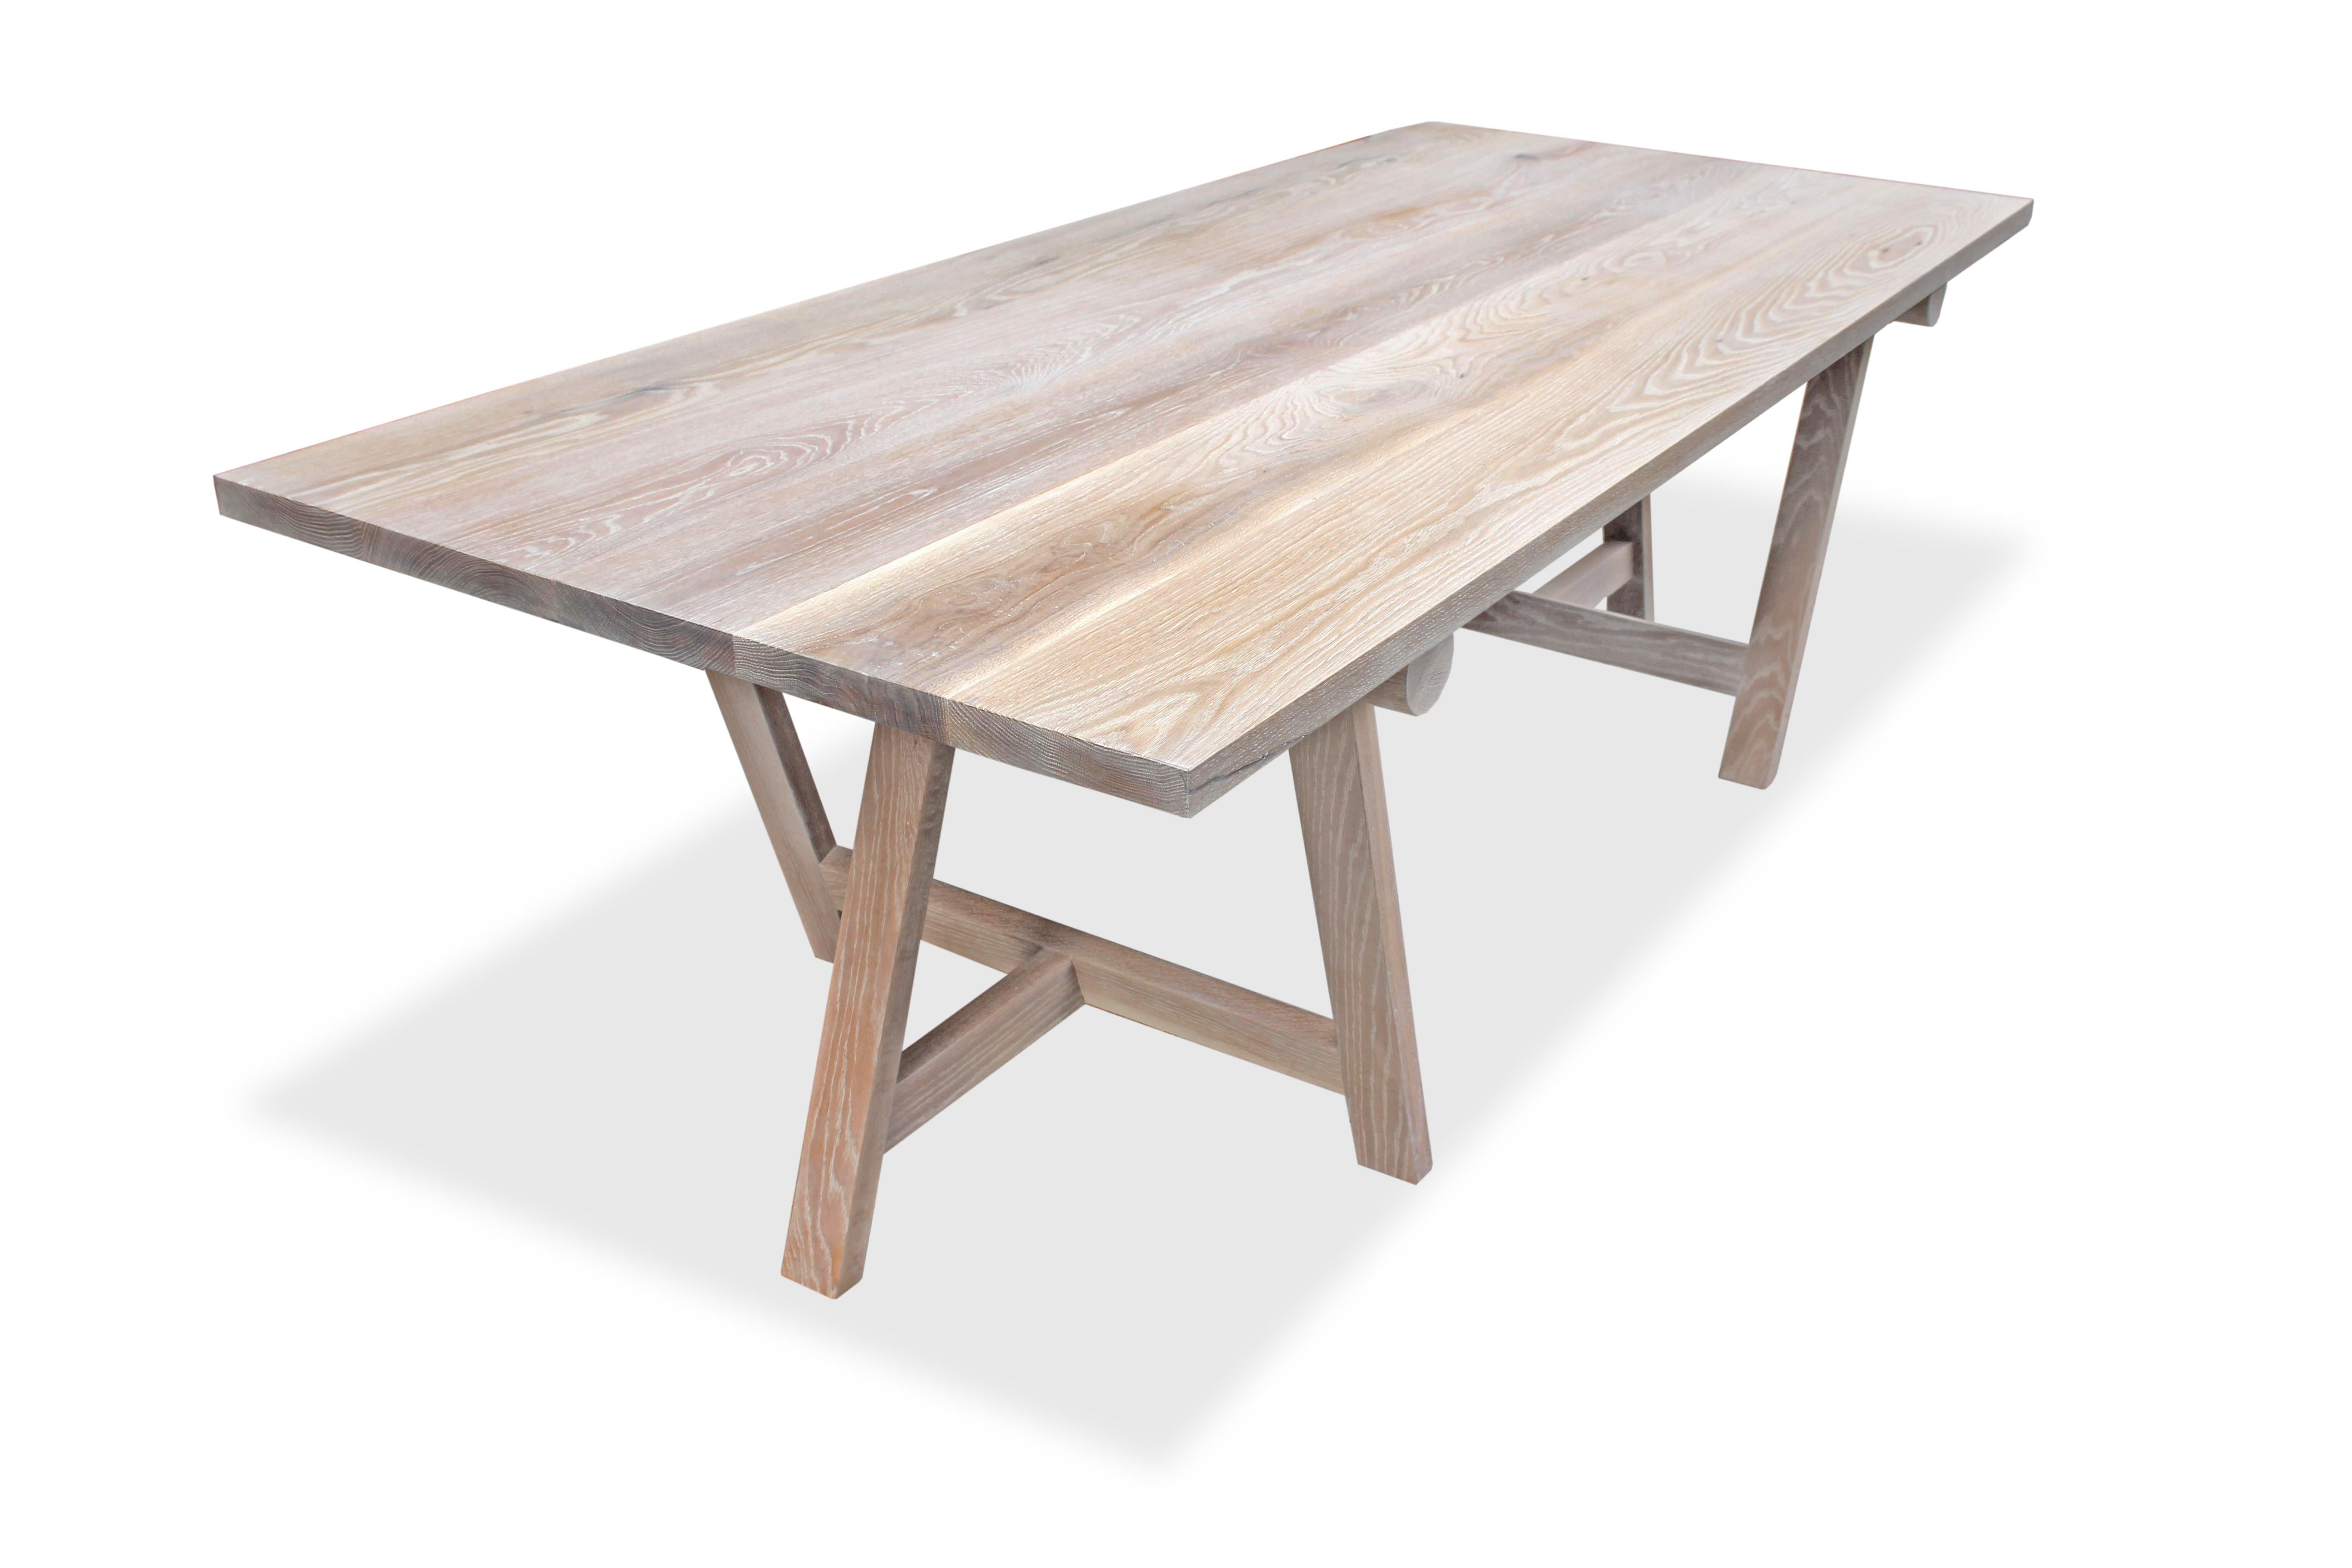 This white oak dining table conveys a graceful simplicity. Inspired by a recent trip to the island of St. Barths, this piece features clean lines and a gorgeous cerused finish.